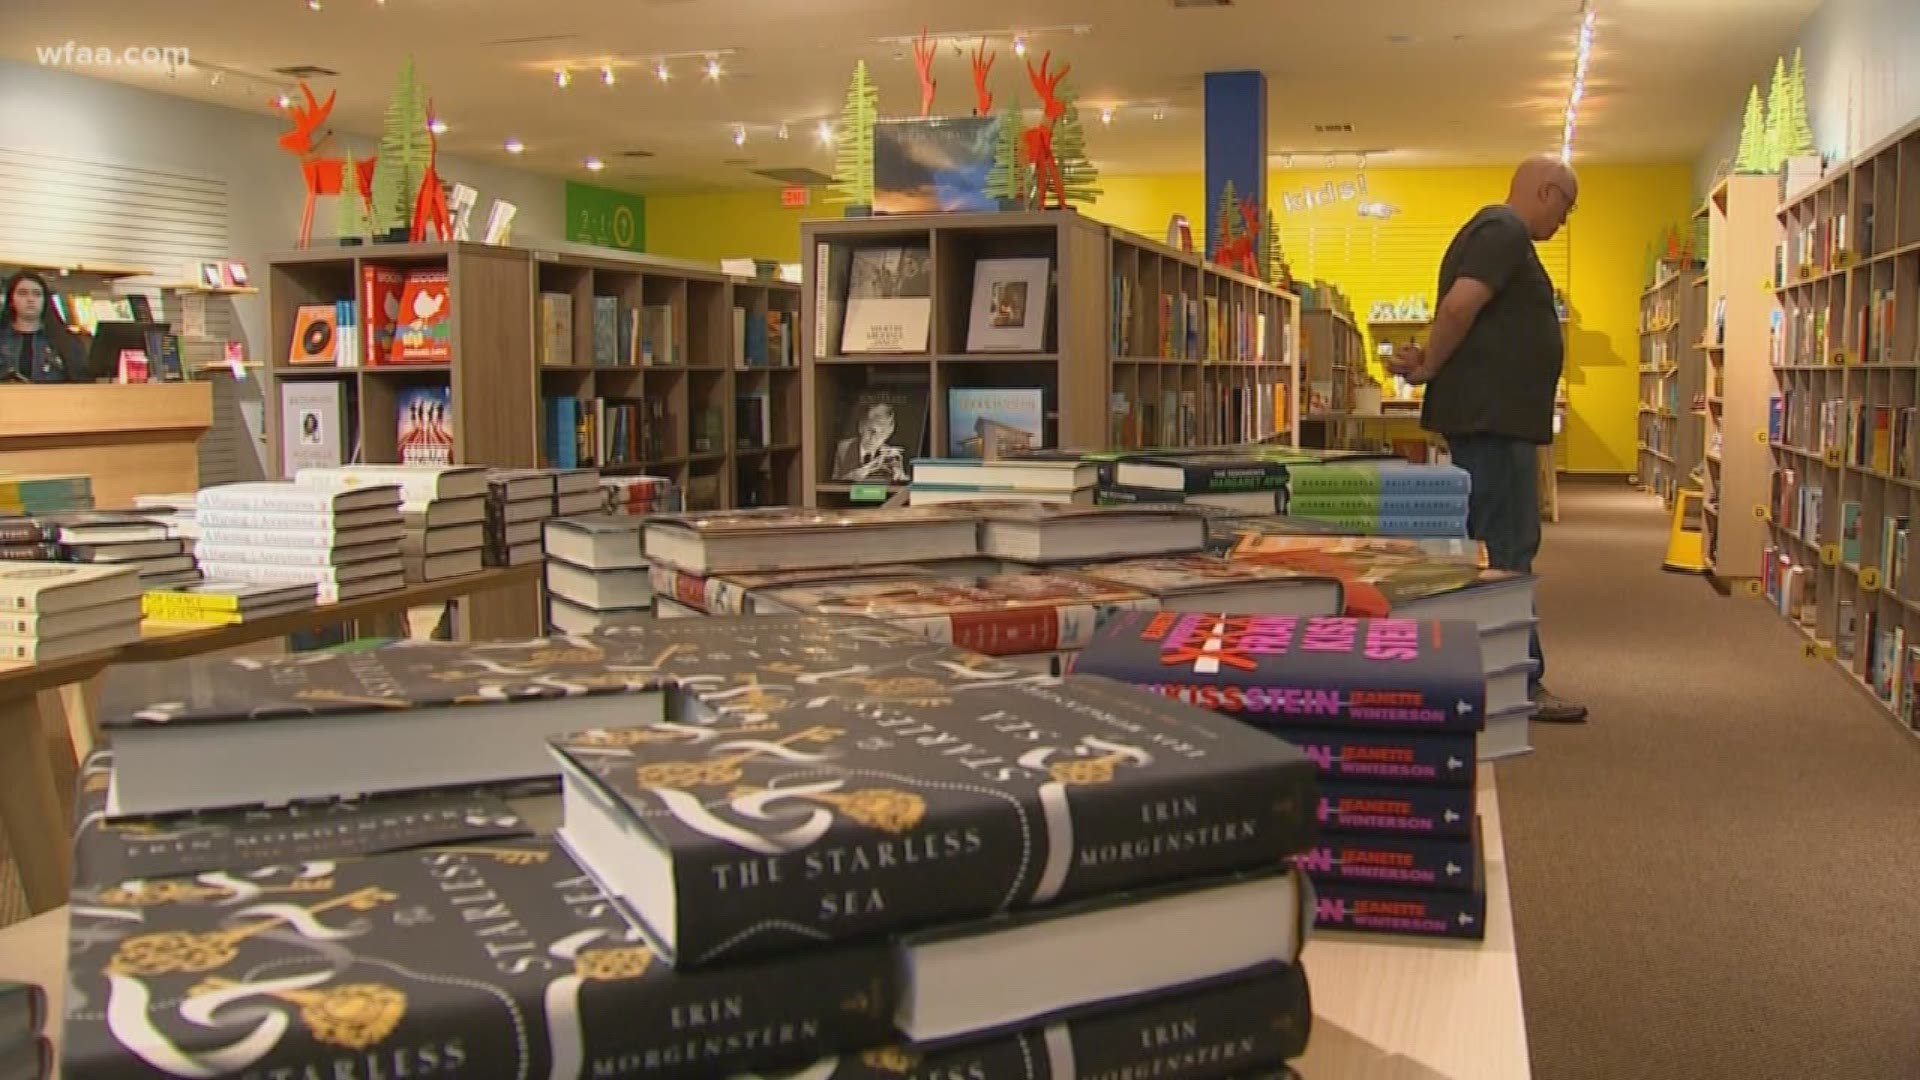 Interabang Books was obliterated by the storm, but its owner set a deadline to get back to business.